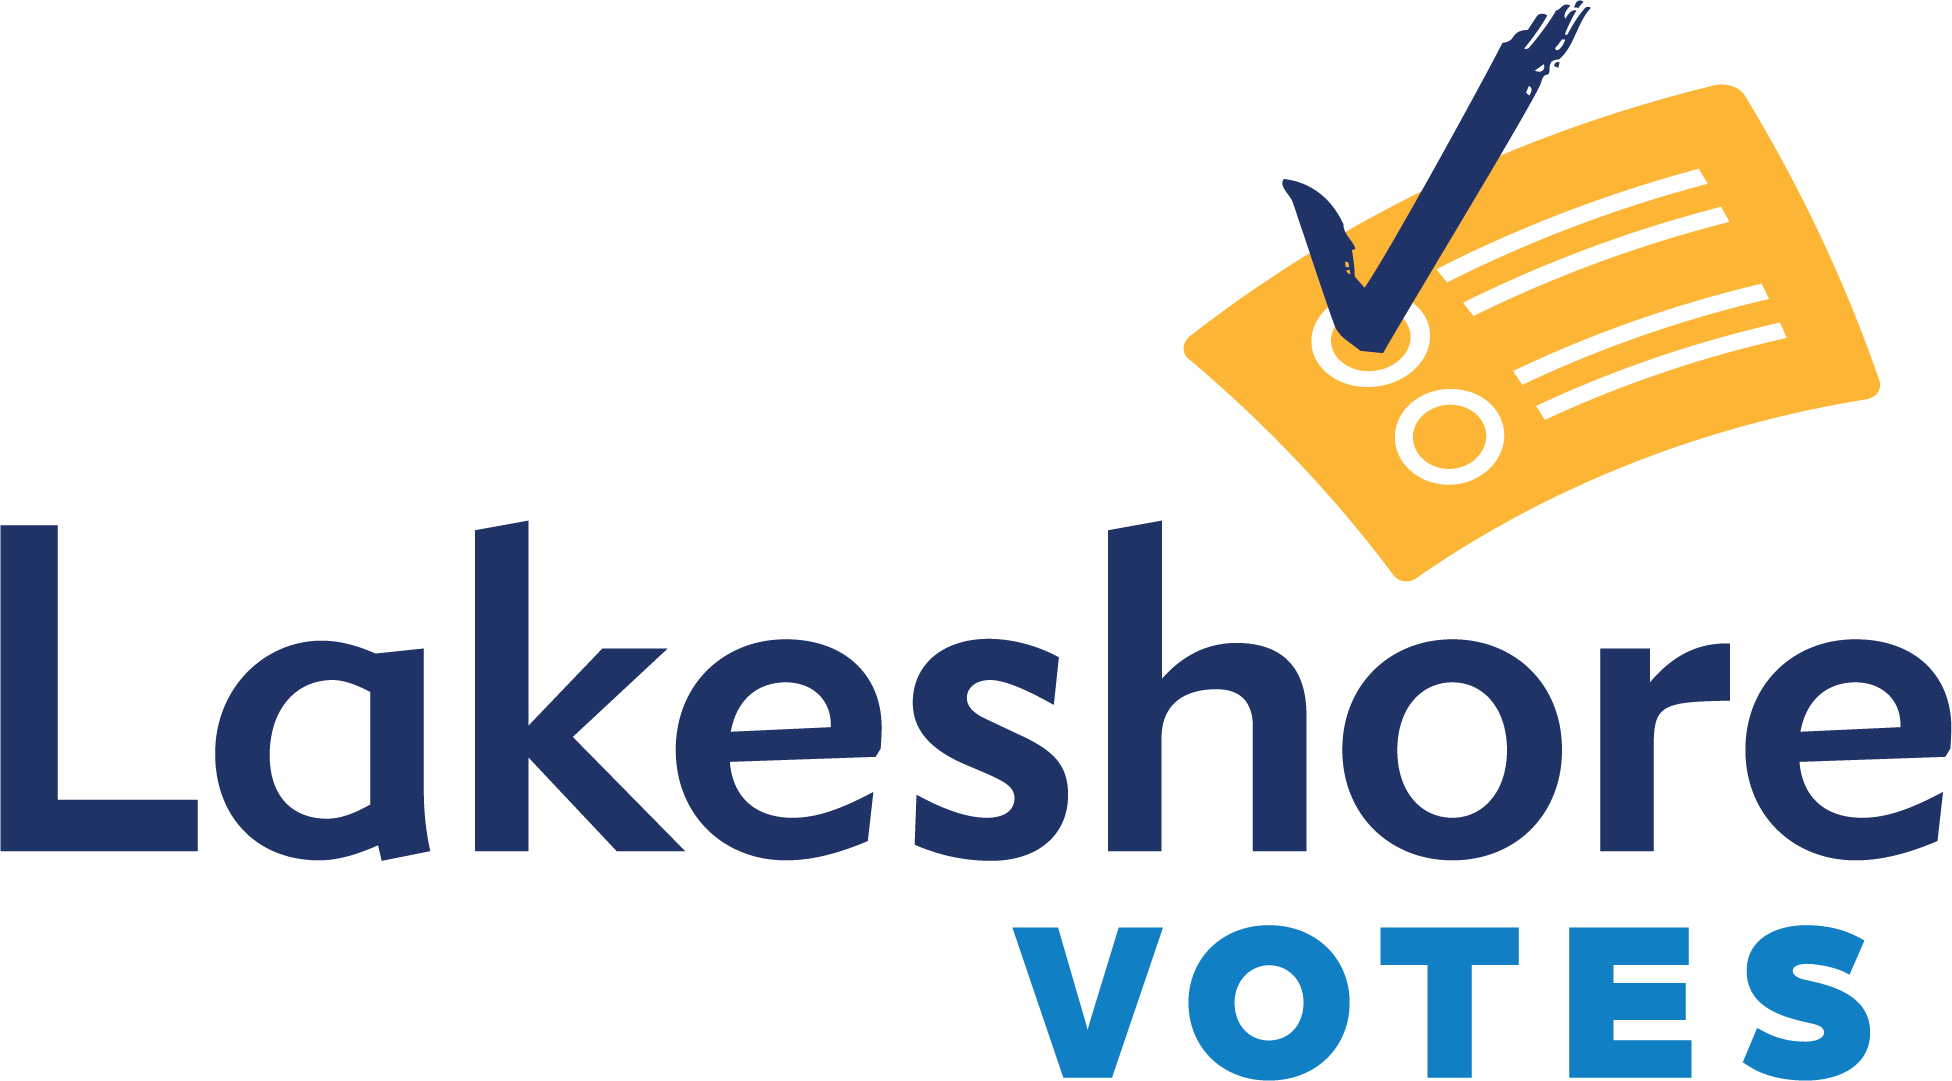 "Lakeshore Votes" logo in text with a yellow ballot with blue checkmark at in.